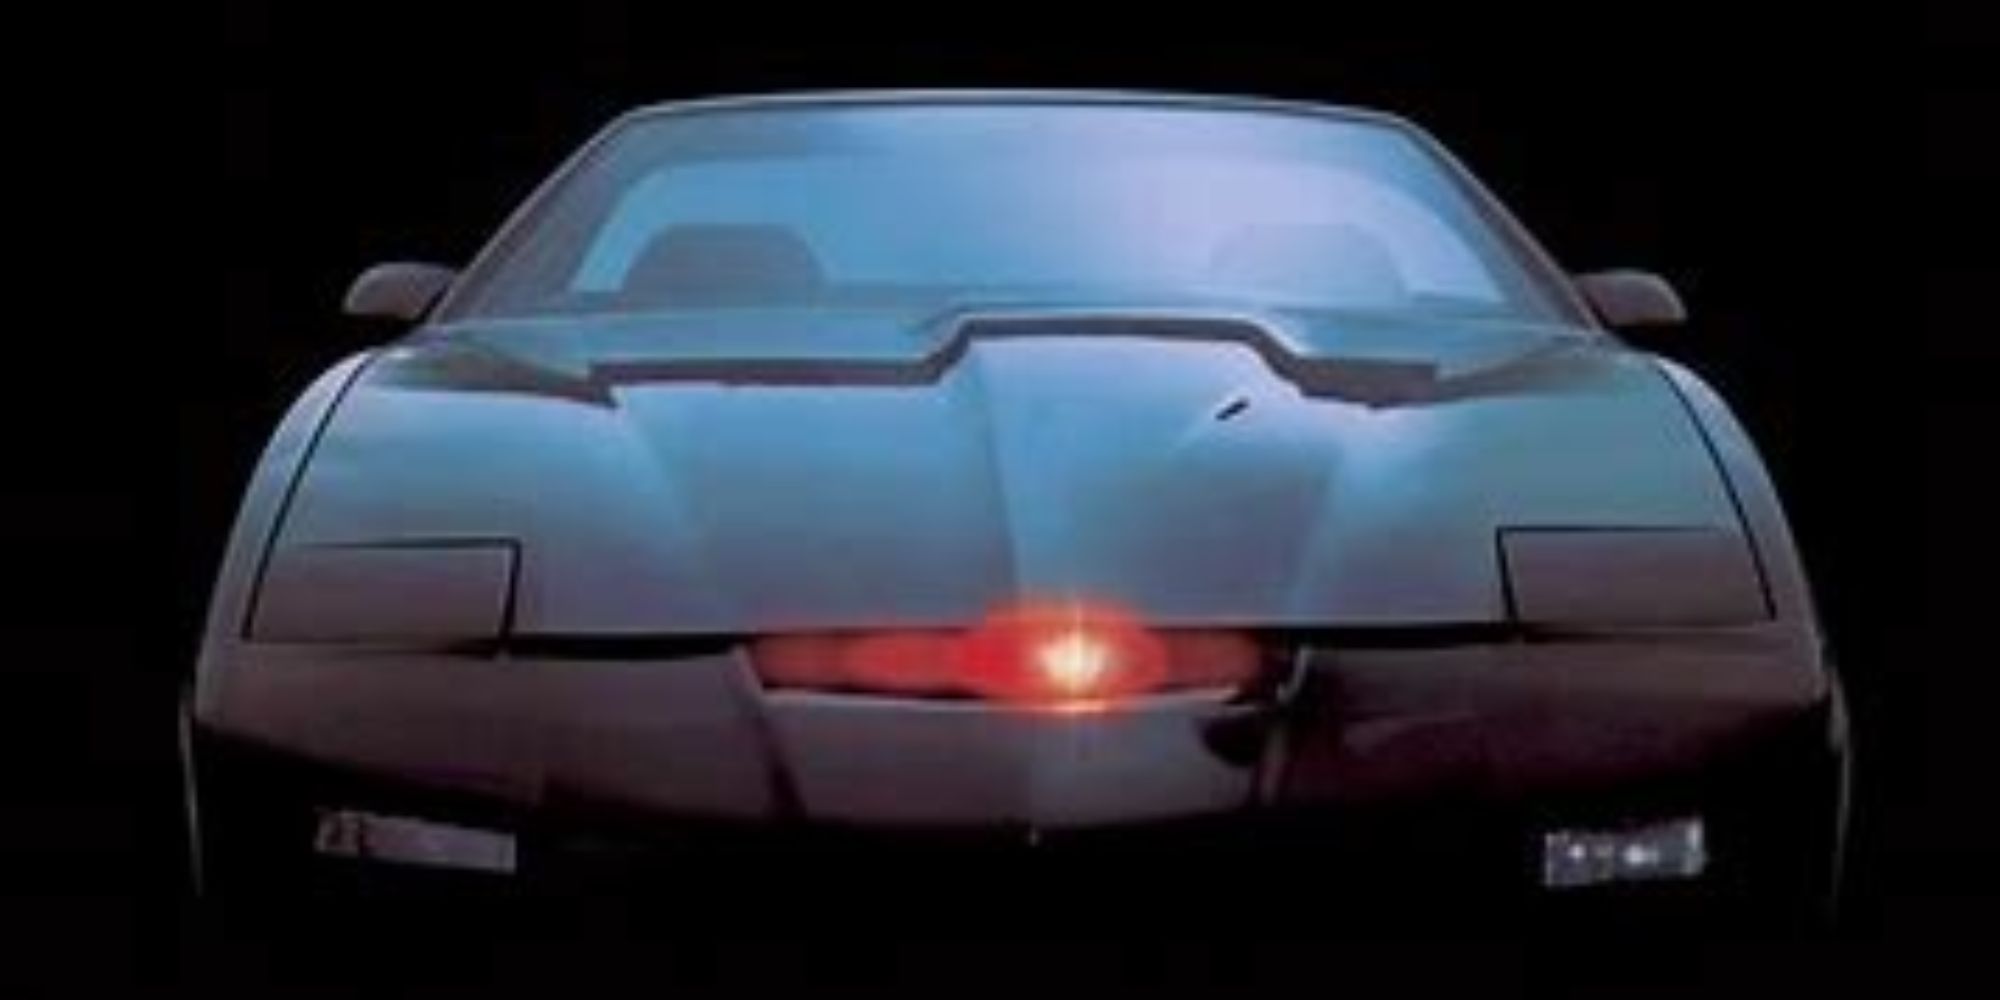 A front view of KITT from Knight Rider.